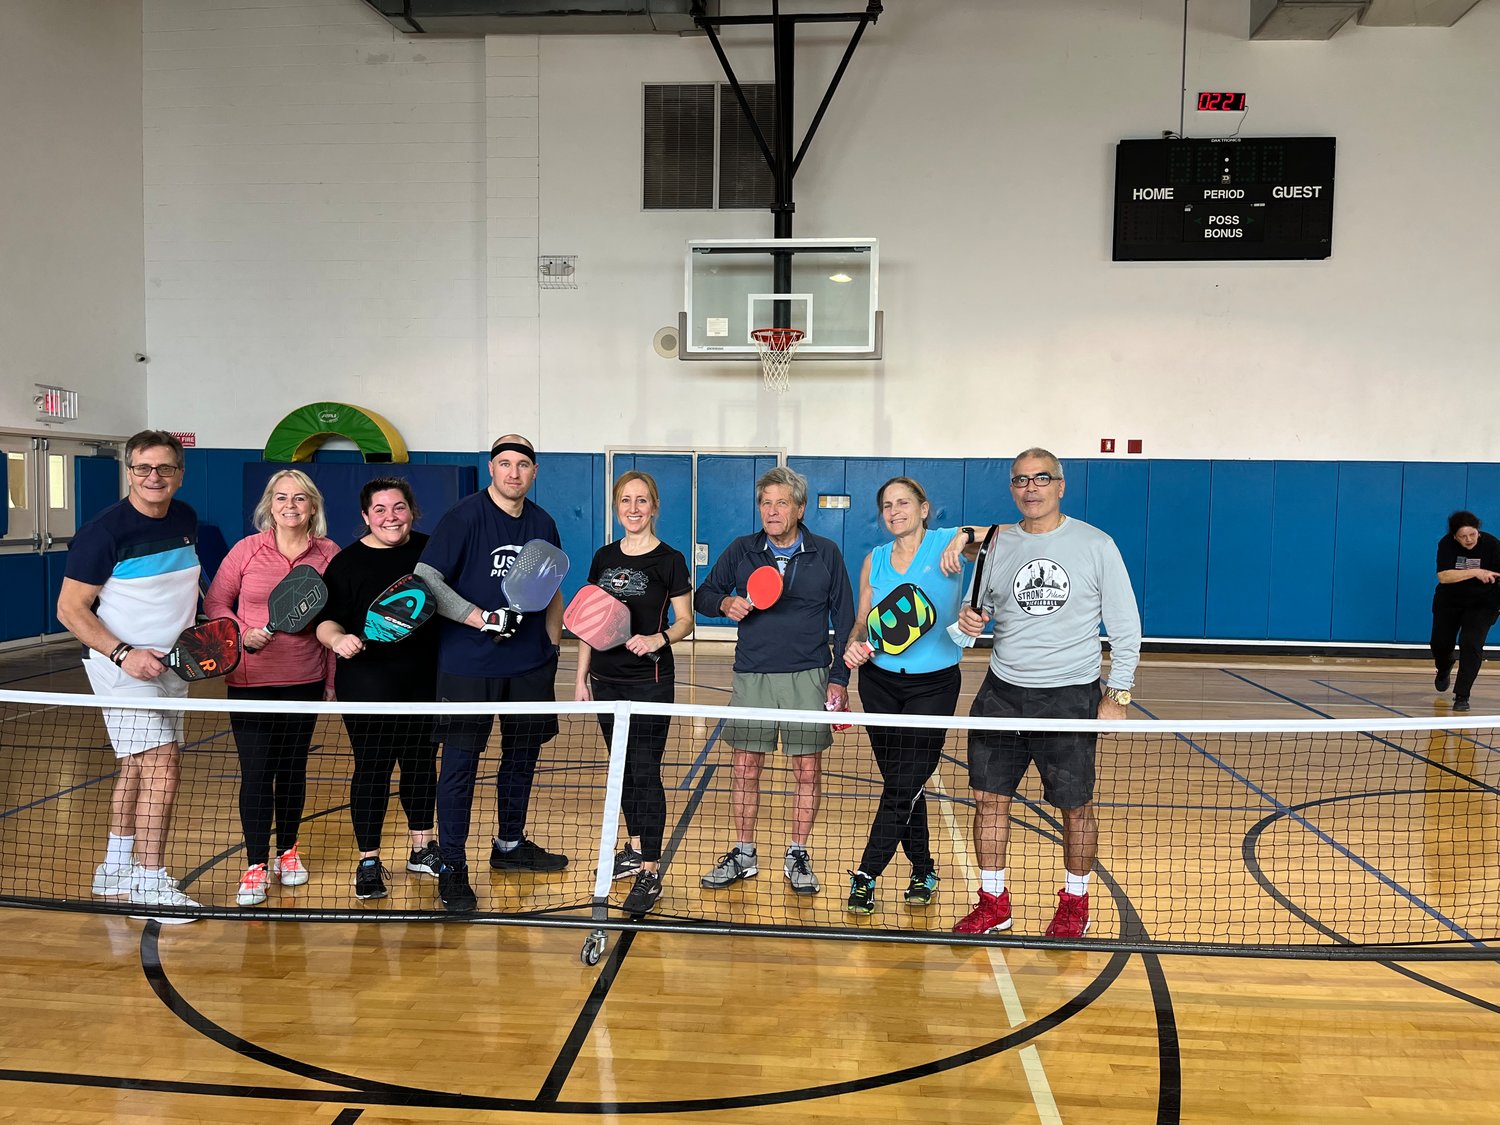 More than 30 Baldwin, Rockville Centre, and neighboring south shore community members and Long Island Pickleball Pros raised more than $1500 for Bethany House — a Baldwin-based organization focused on supporting homeless woman and their children